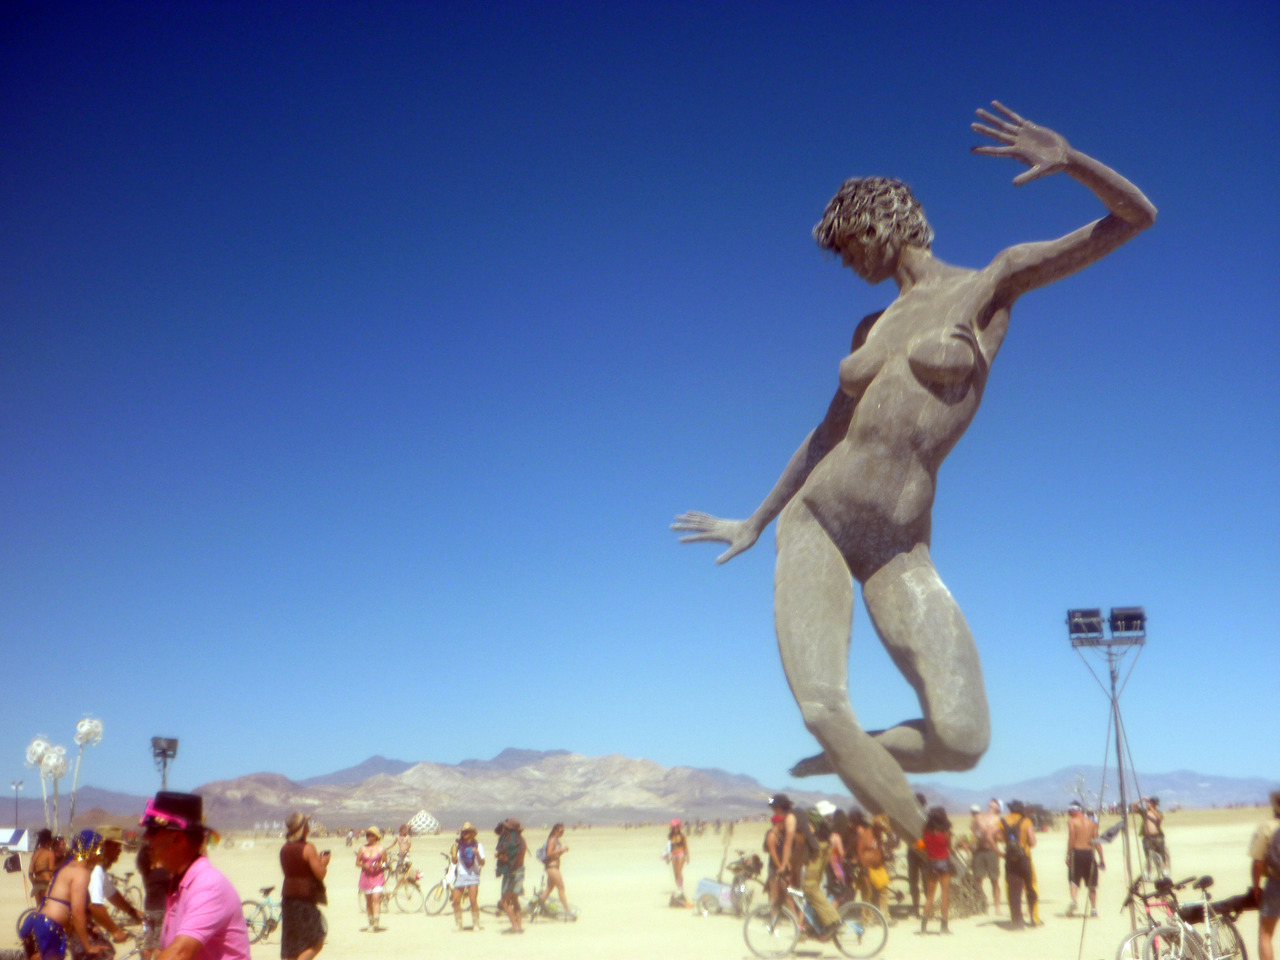 our first day at burning man…such a beautiful day!